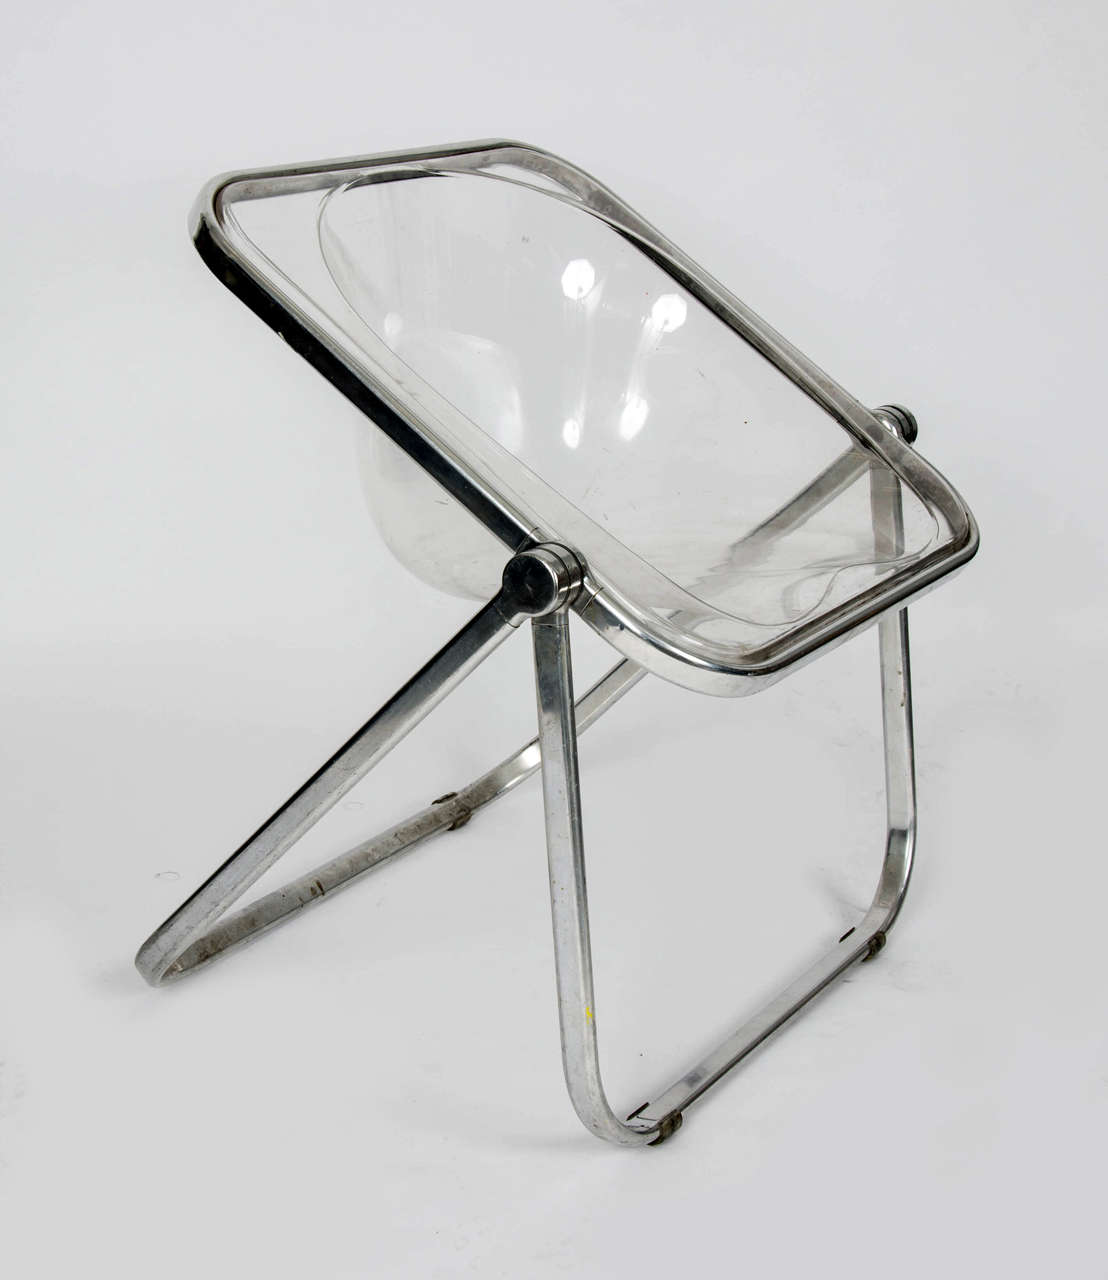 An original1969 'Plia' clear folding chair by Giancarlo Piretti for Castelli. This piece contains markings and scratches that are consistent with age and use.

By Giancarlo Piretti. 
